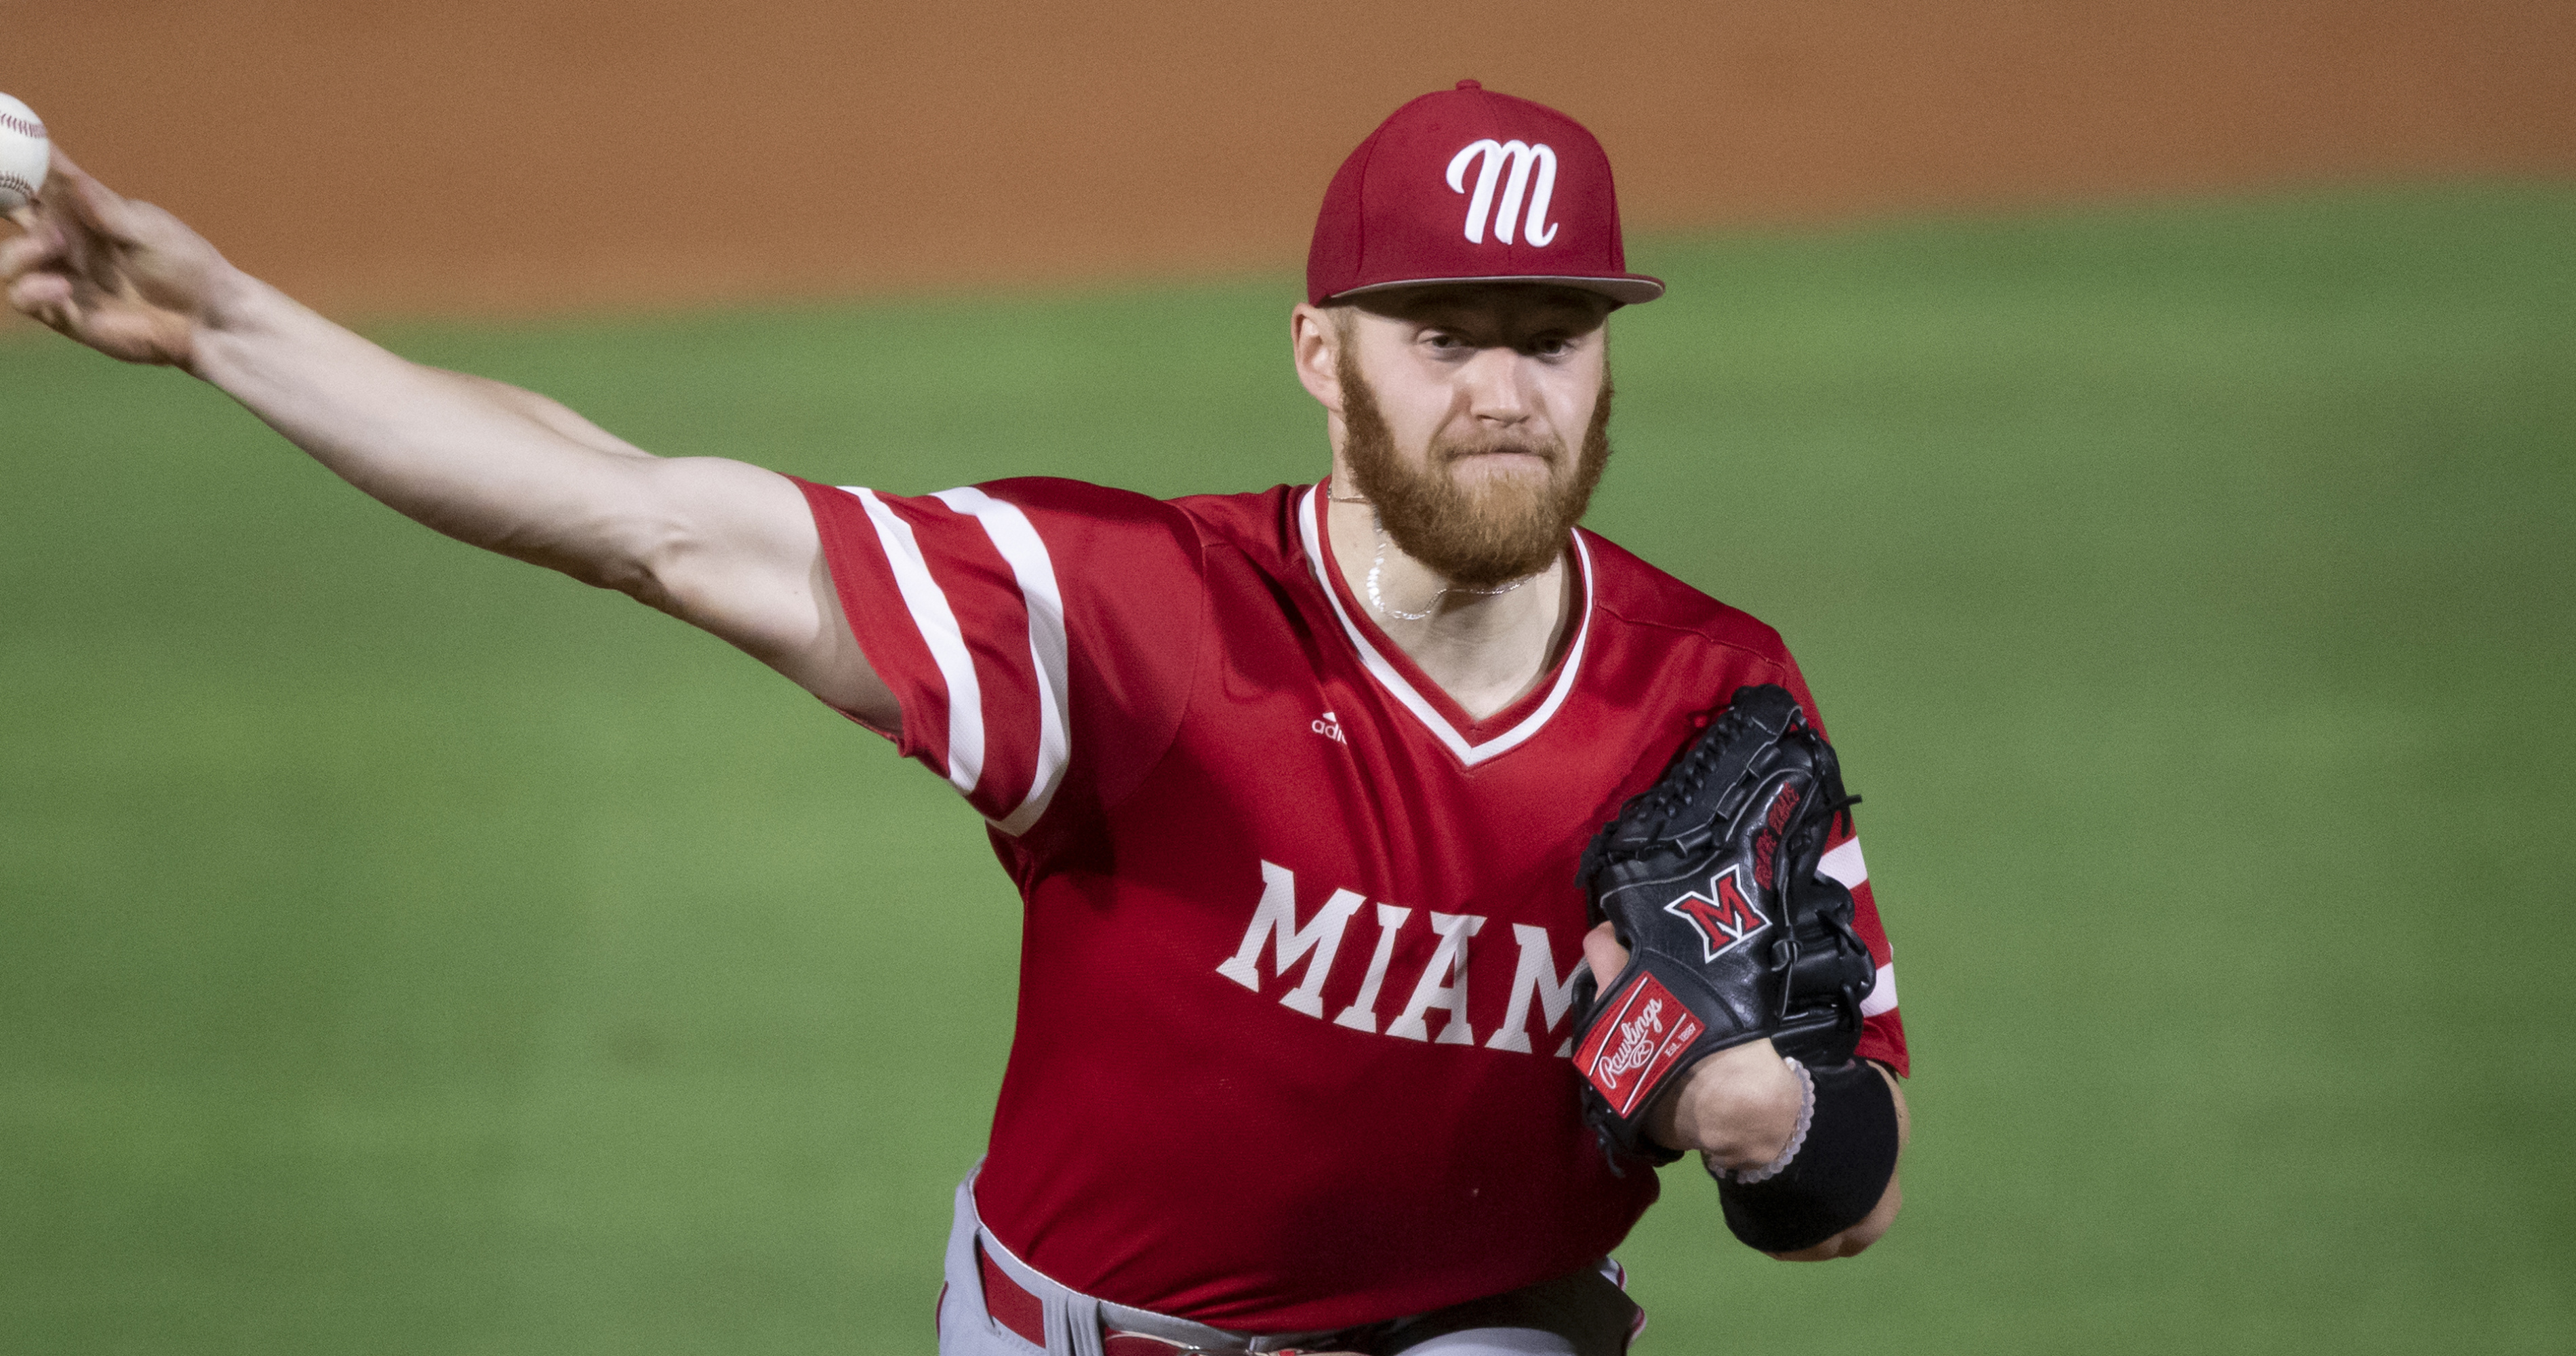 Miami University pitcher drafted to Los Angeles Angels